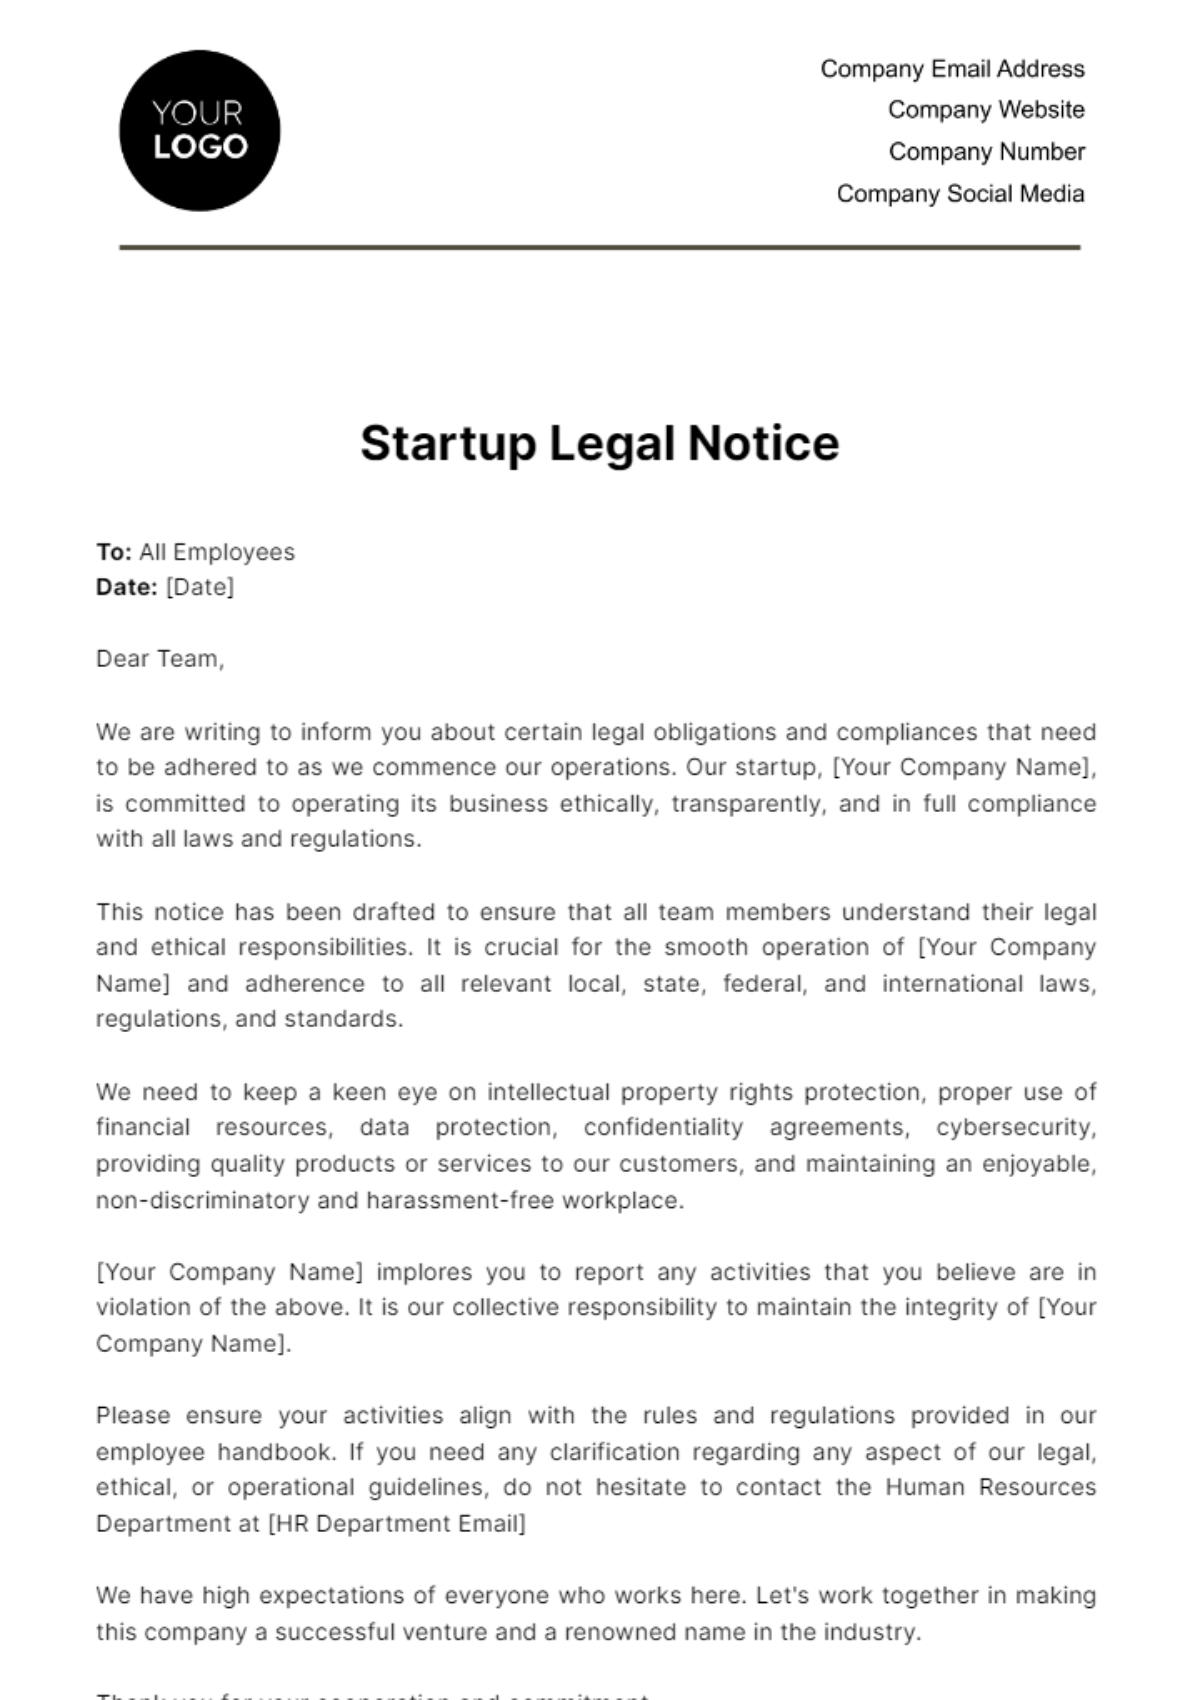 Startup Legal Notice Template